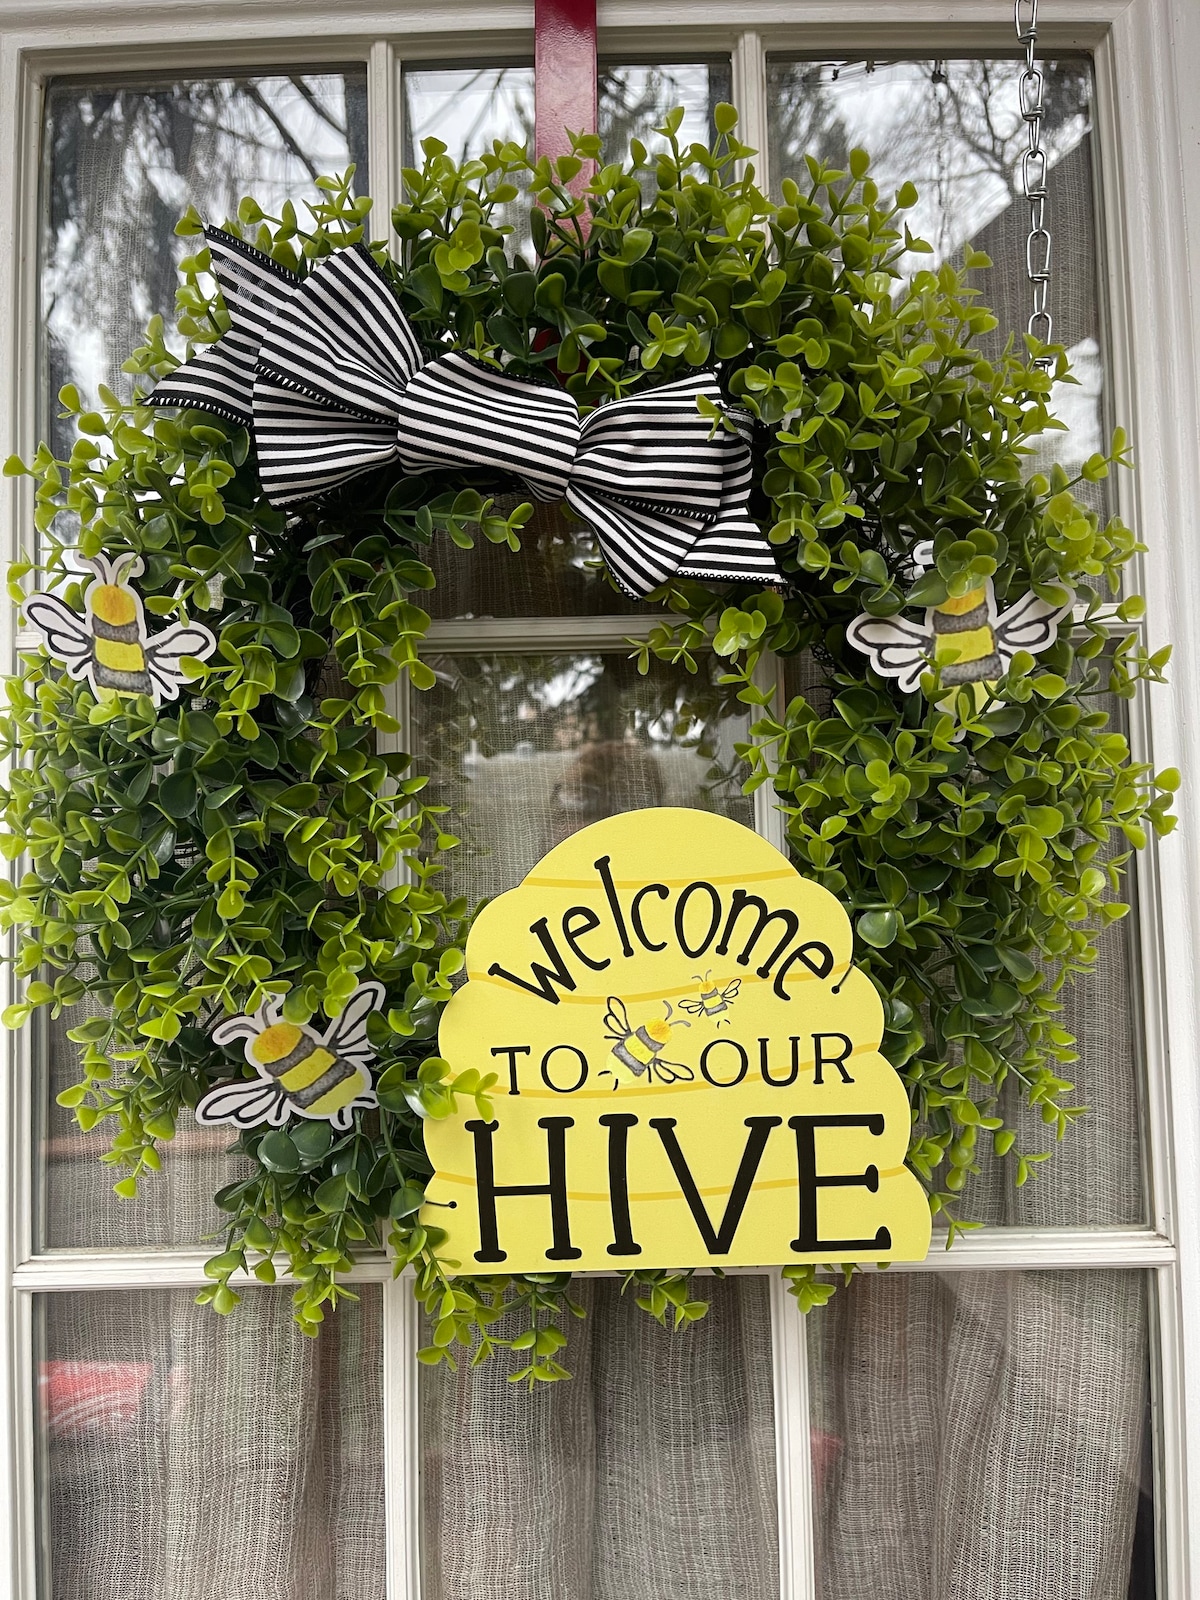 The Hive in Safe, Sweet Northeast Ithaca